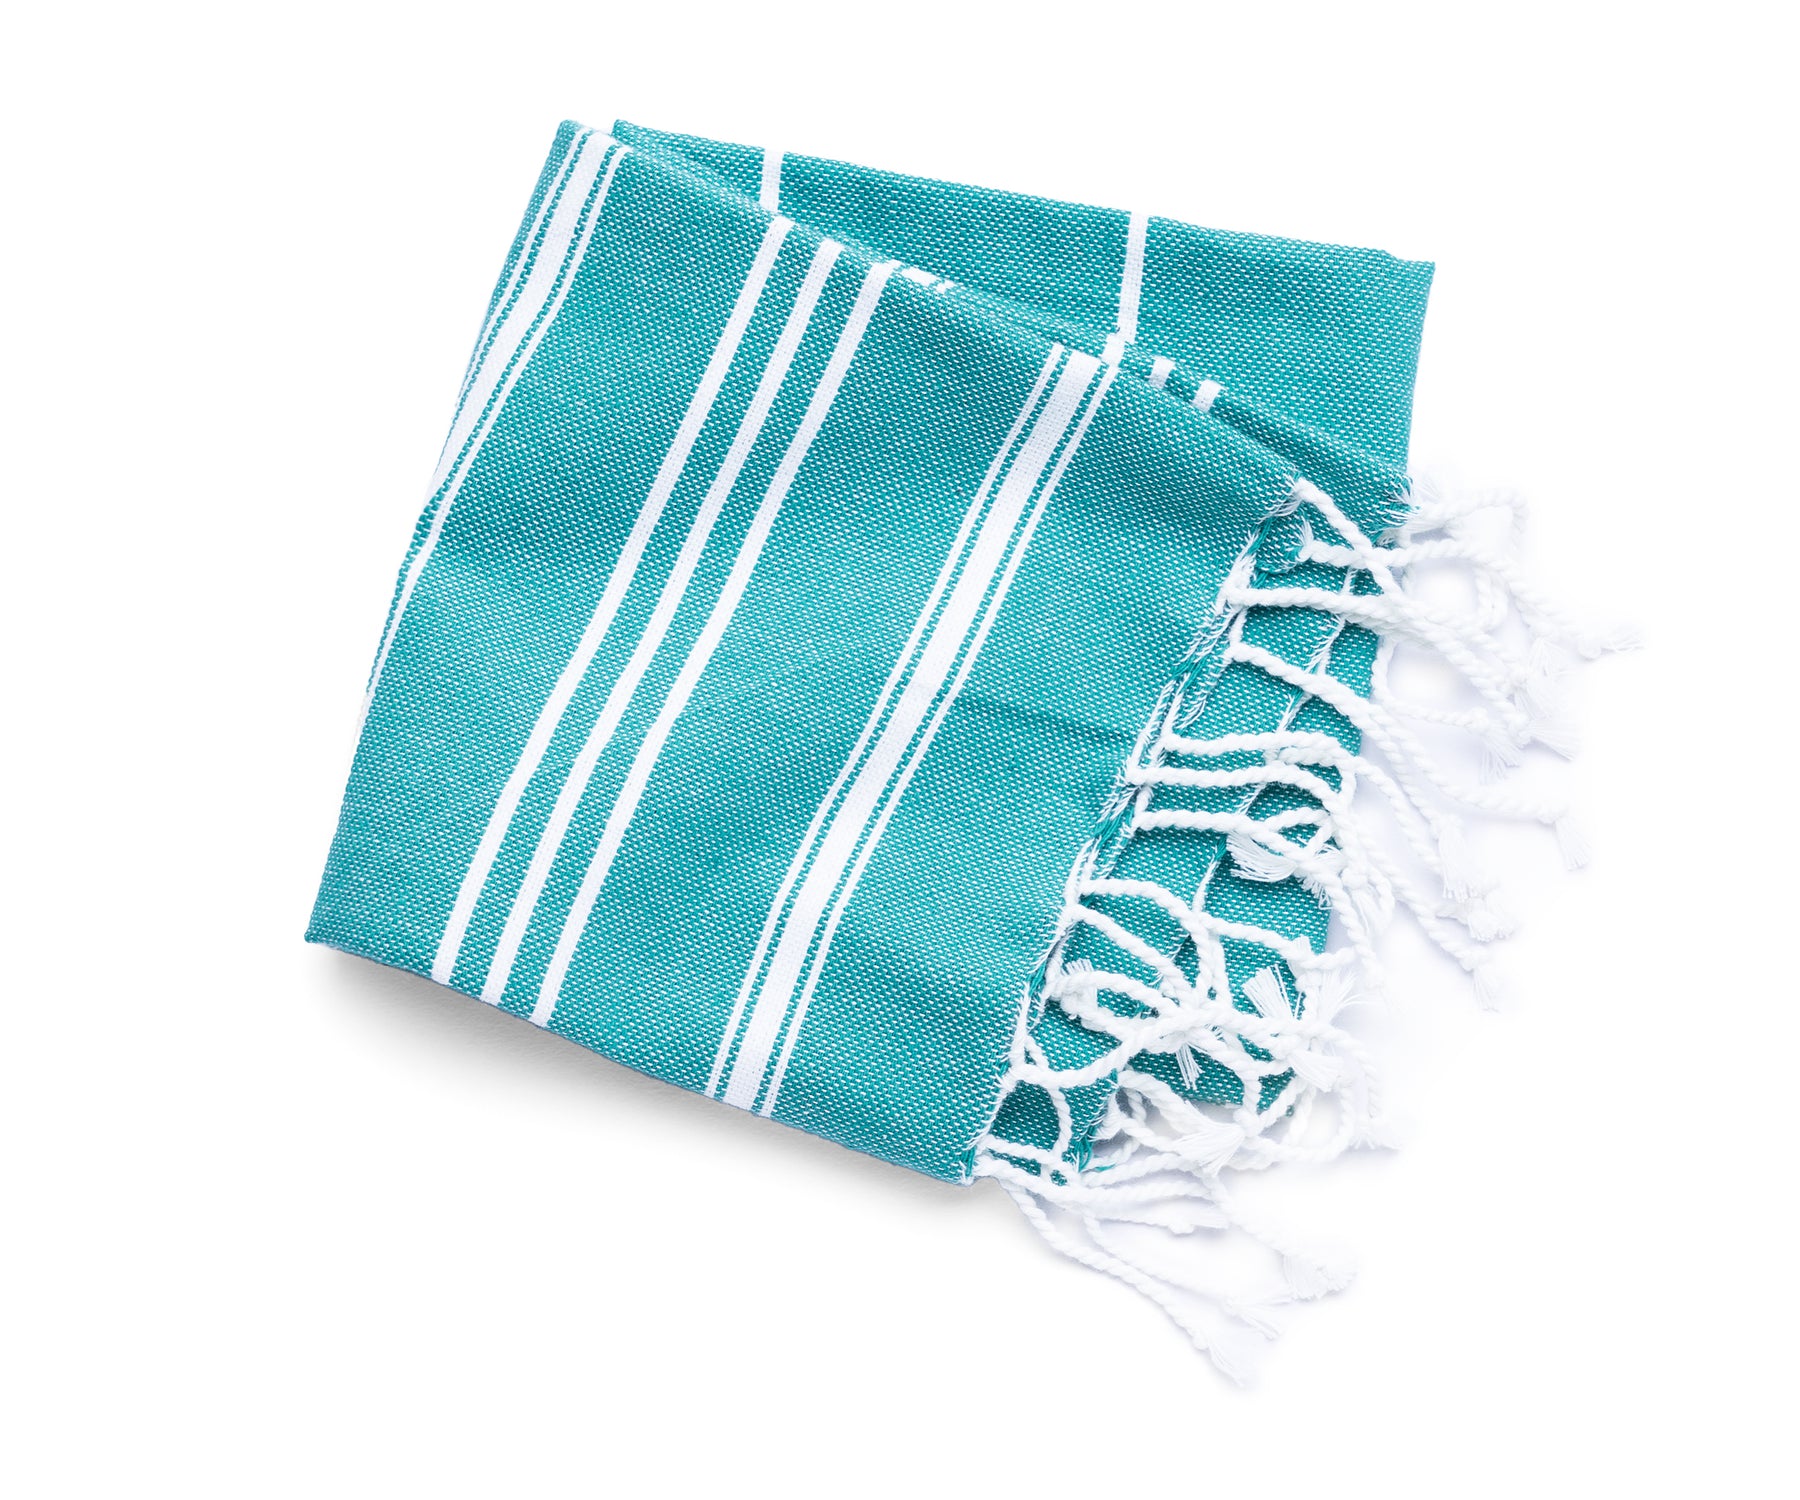 All Cotton and Linen Kitchen Towels, Cotton Dish Towels, Striped Dish Towels,  Teal Kitchen Towels and Dishcloths Sets, Farmhouse Hand Towels Set of 6  18x28 (Teal) 